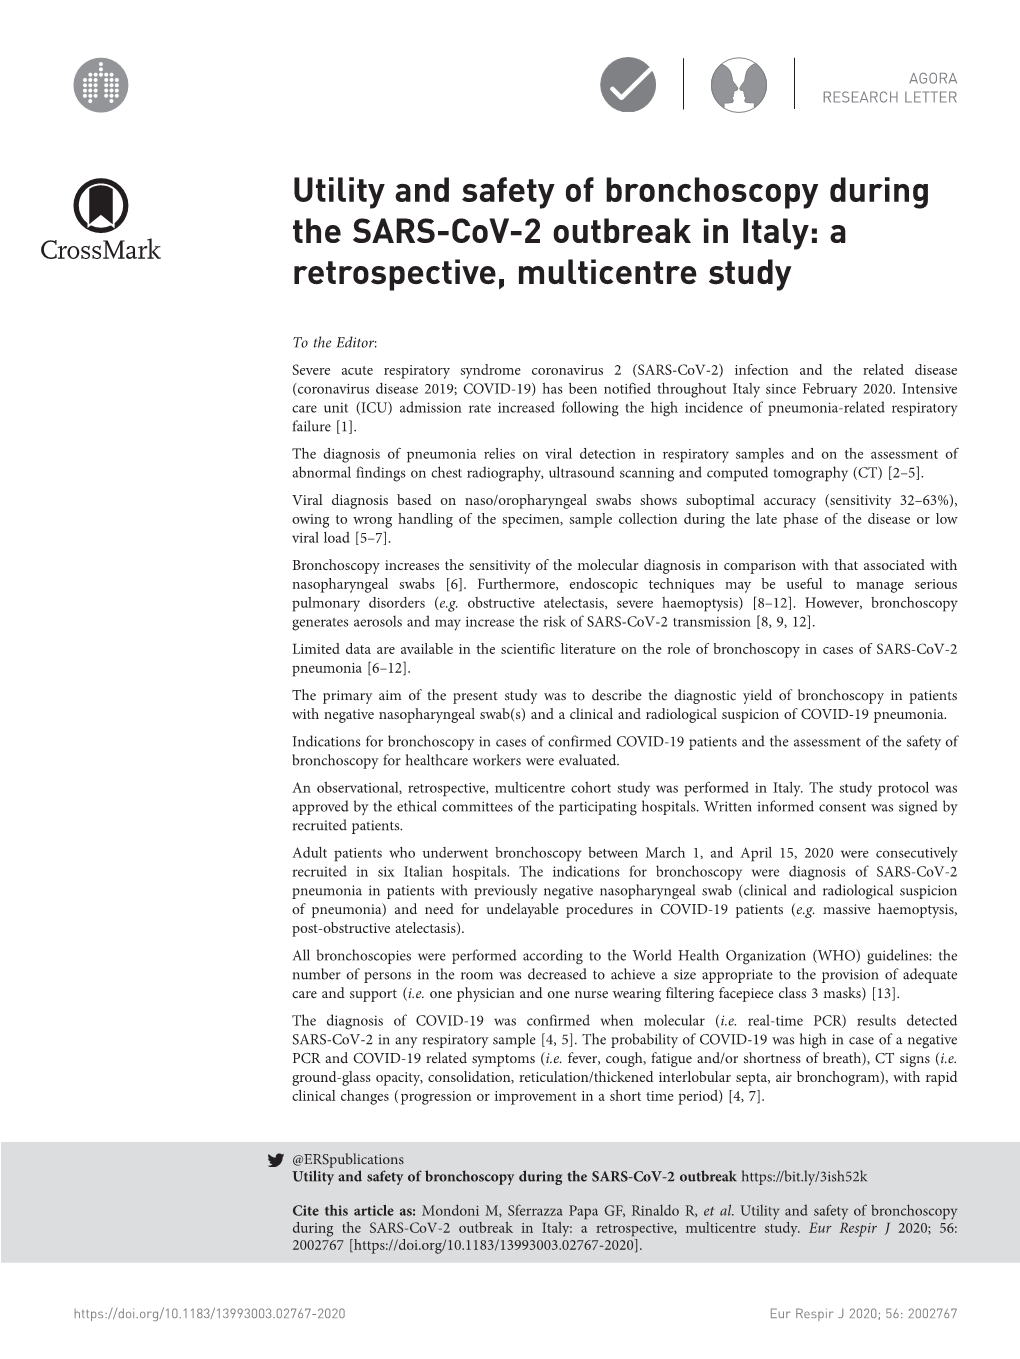 Utility and Safety of Bronchoscopy During the SARS-Cov-2 Outbreak in Italy: a Retrospective, Multicentre Study